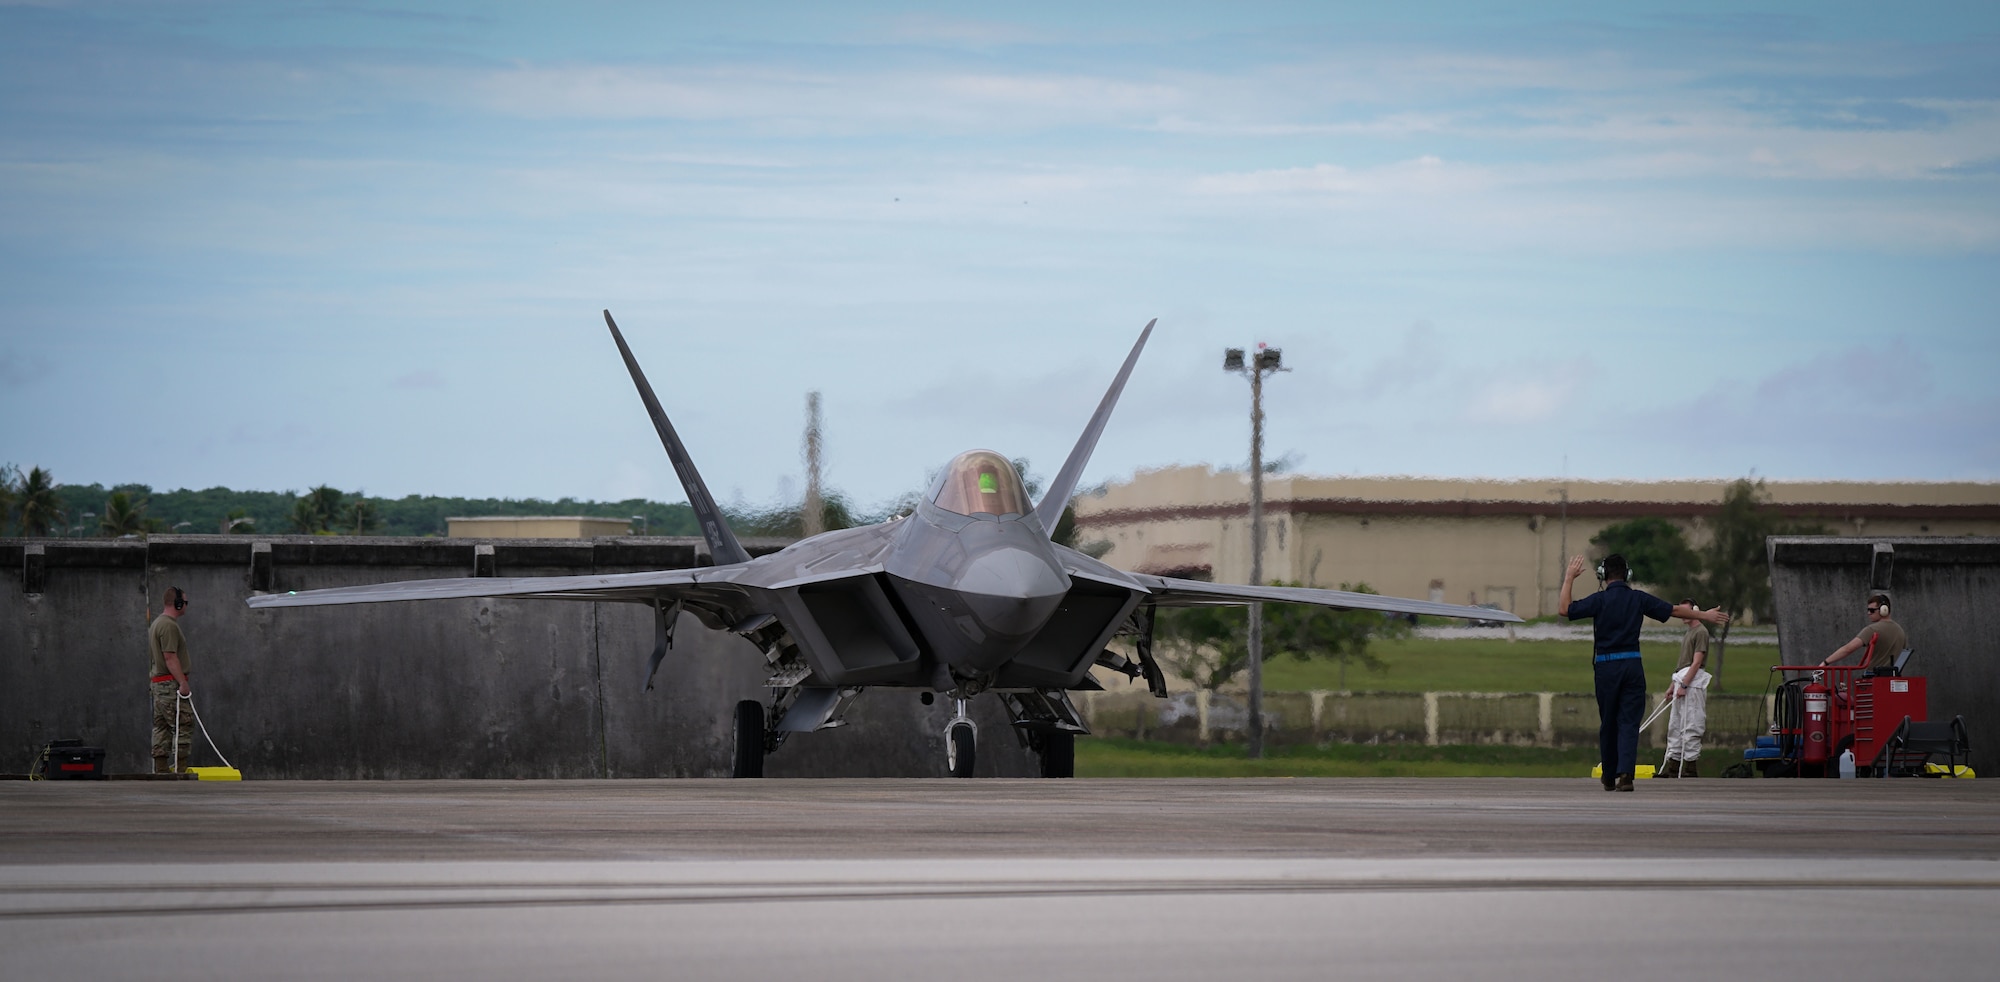 A U.S. Air Force F-22 Raptor assigned to the 199th Fighter Squadron, 154th Wing, Joint Base Pearl Harbor Hickam, Hawaii, arrives in support of Pacific Iron 2021 at Andersen Air Force Base, Guam, July 18, 2021. Pacific Iron 2021 is a Pacific Air Forces dynamic force employment operation to project forces into the USINDOPACOM’s area of responsibility in support of the 2018 National Defense Strategy which called on the military to be a more lethal, adaptive, and resilient force. (U.S. Air Force photo by Master Sgt. Richard P. Ebensberger)